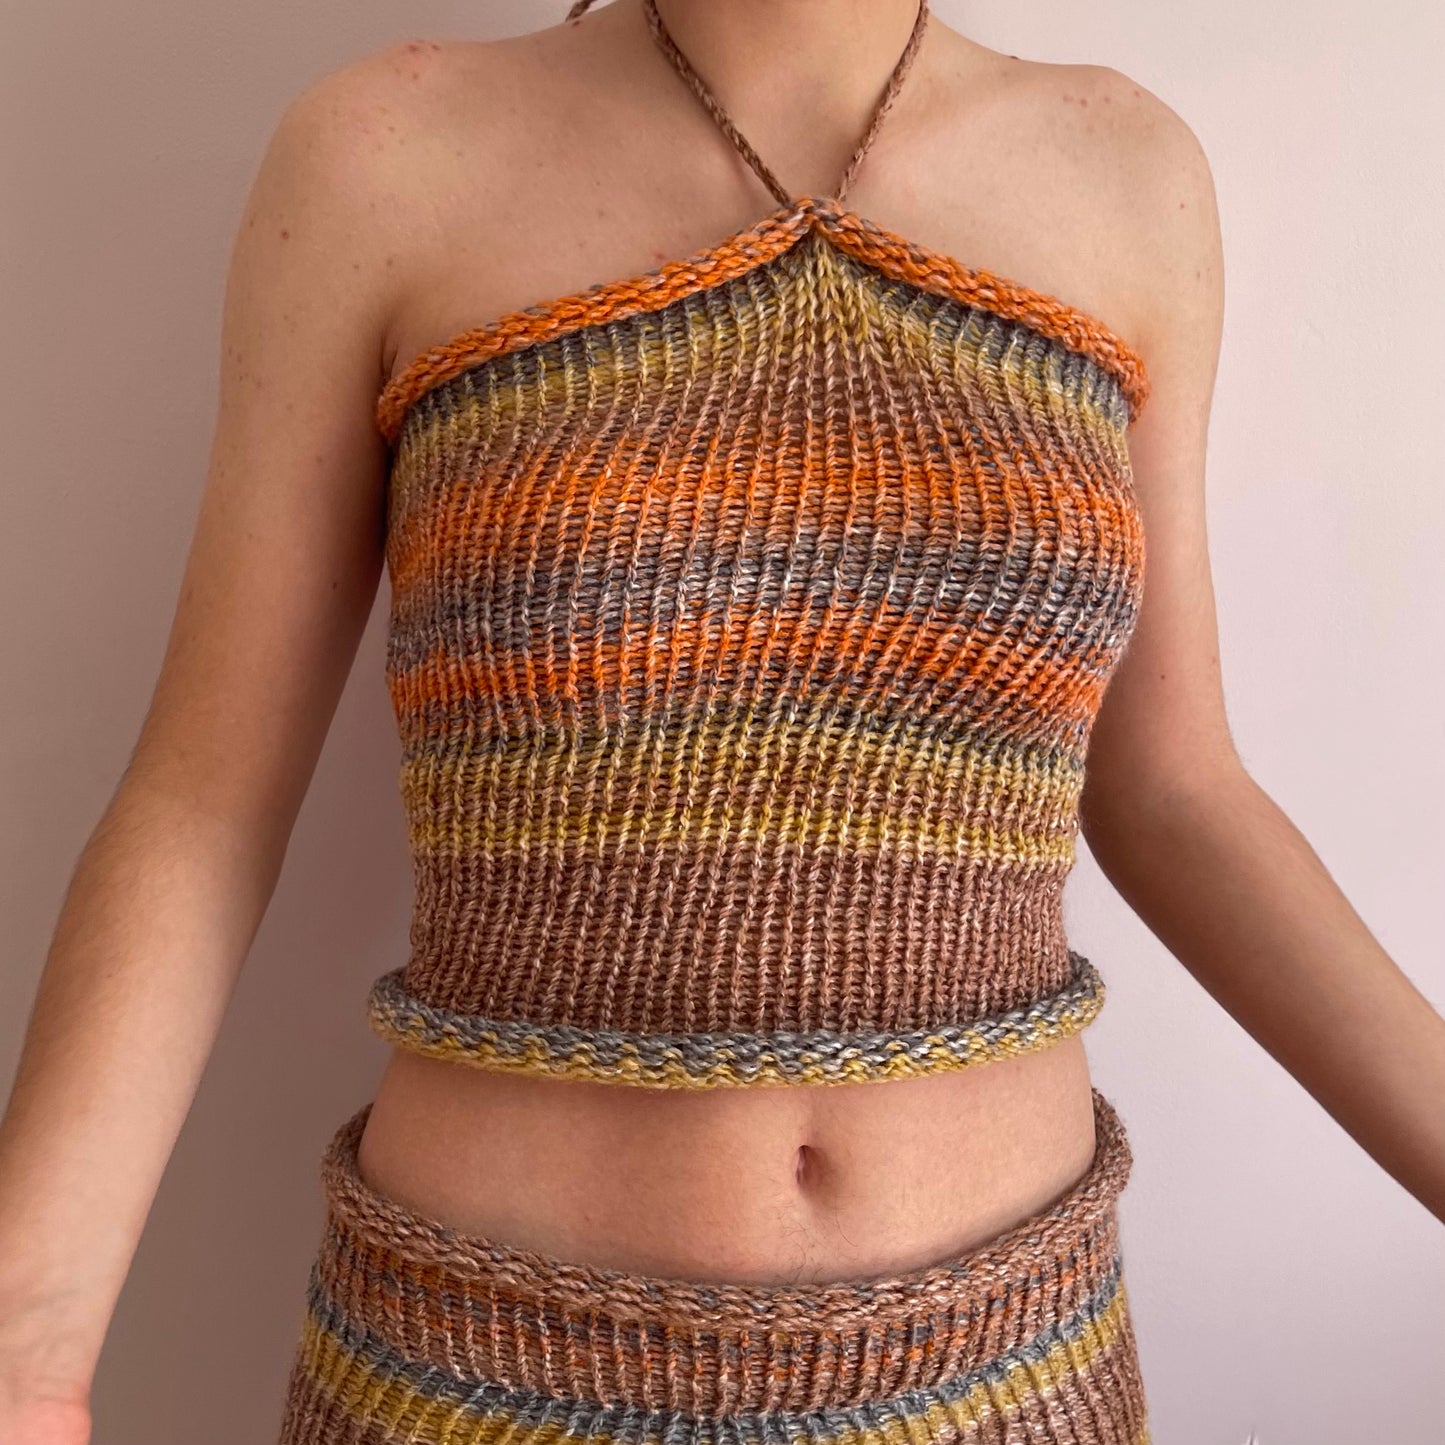 SET: Handmade knitted halter top and skirt in orange, mustard yellow and grey